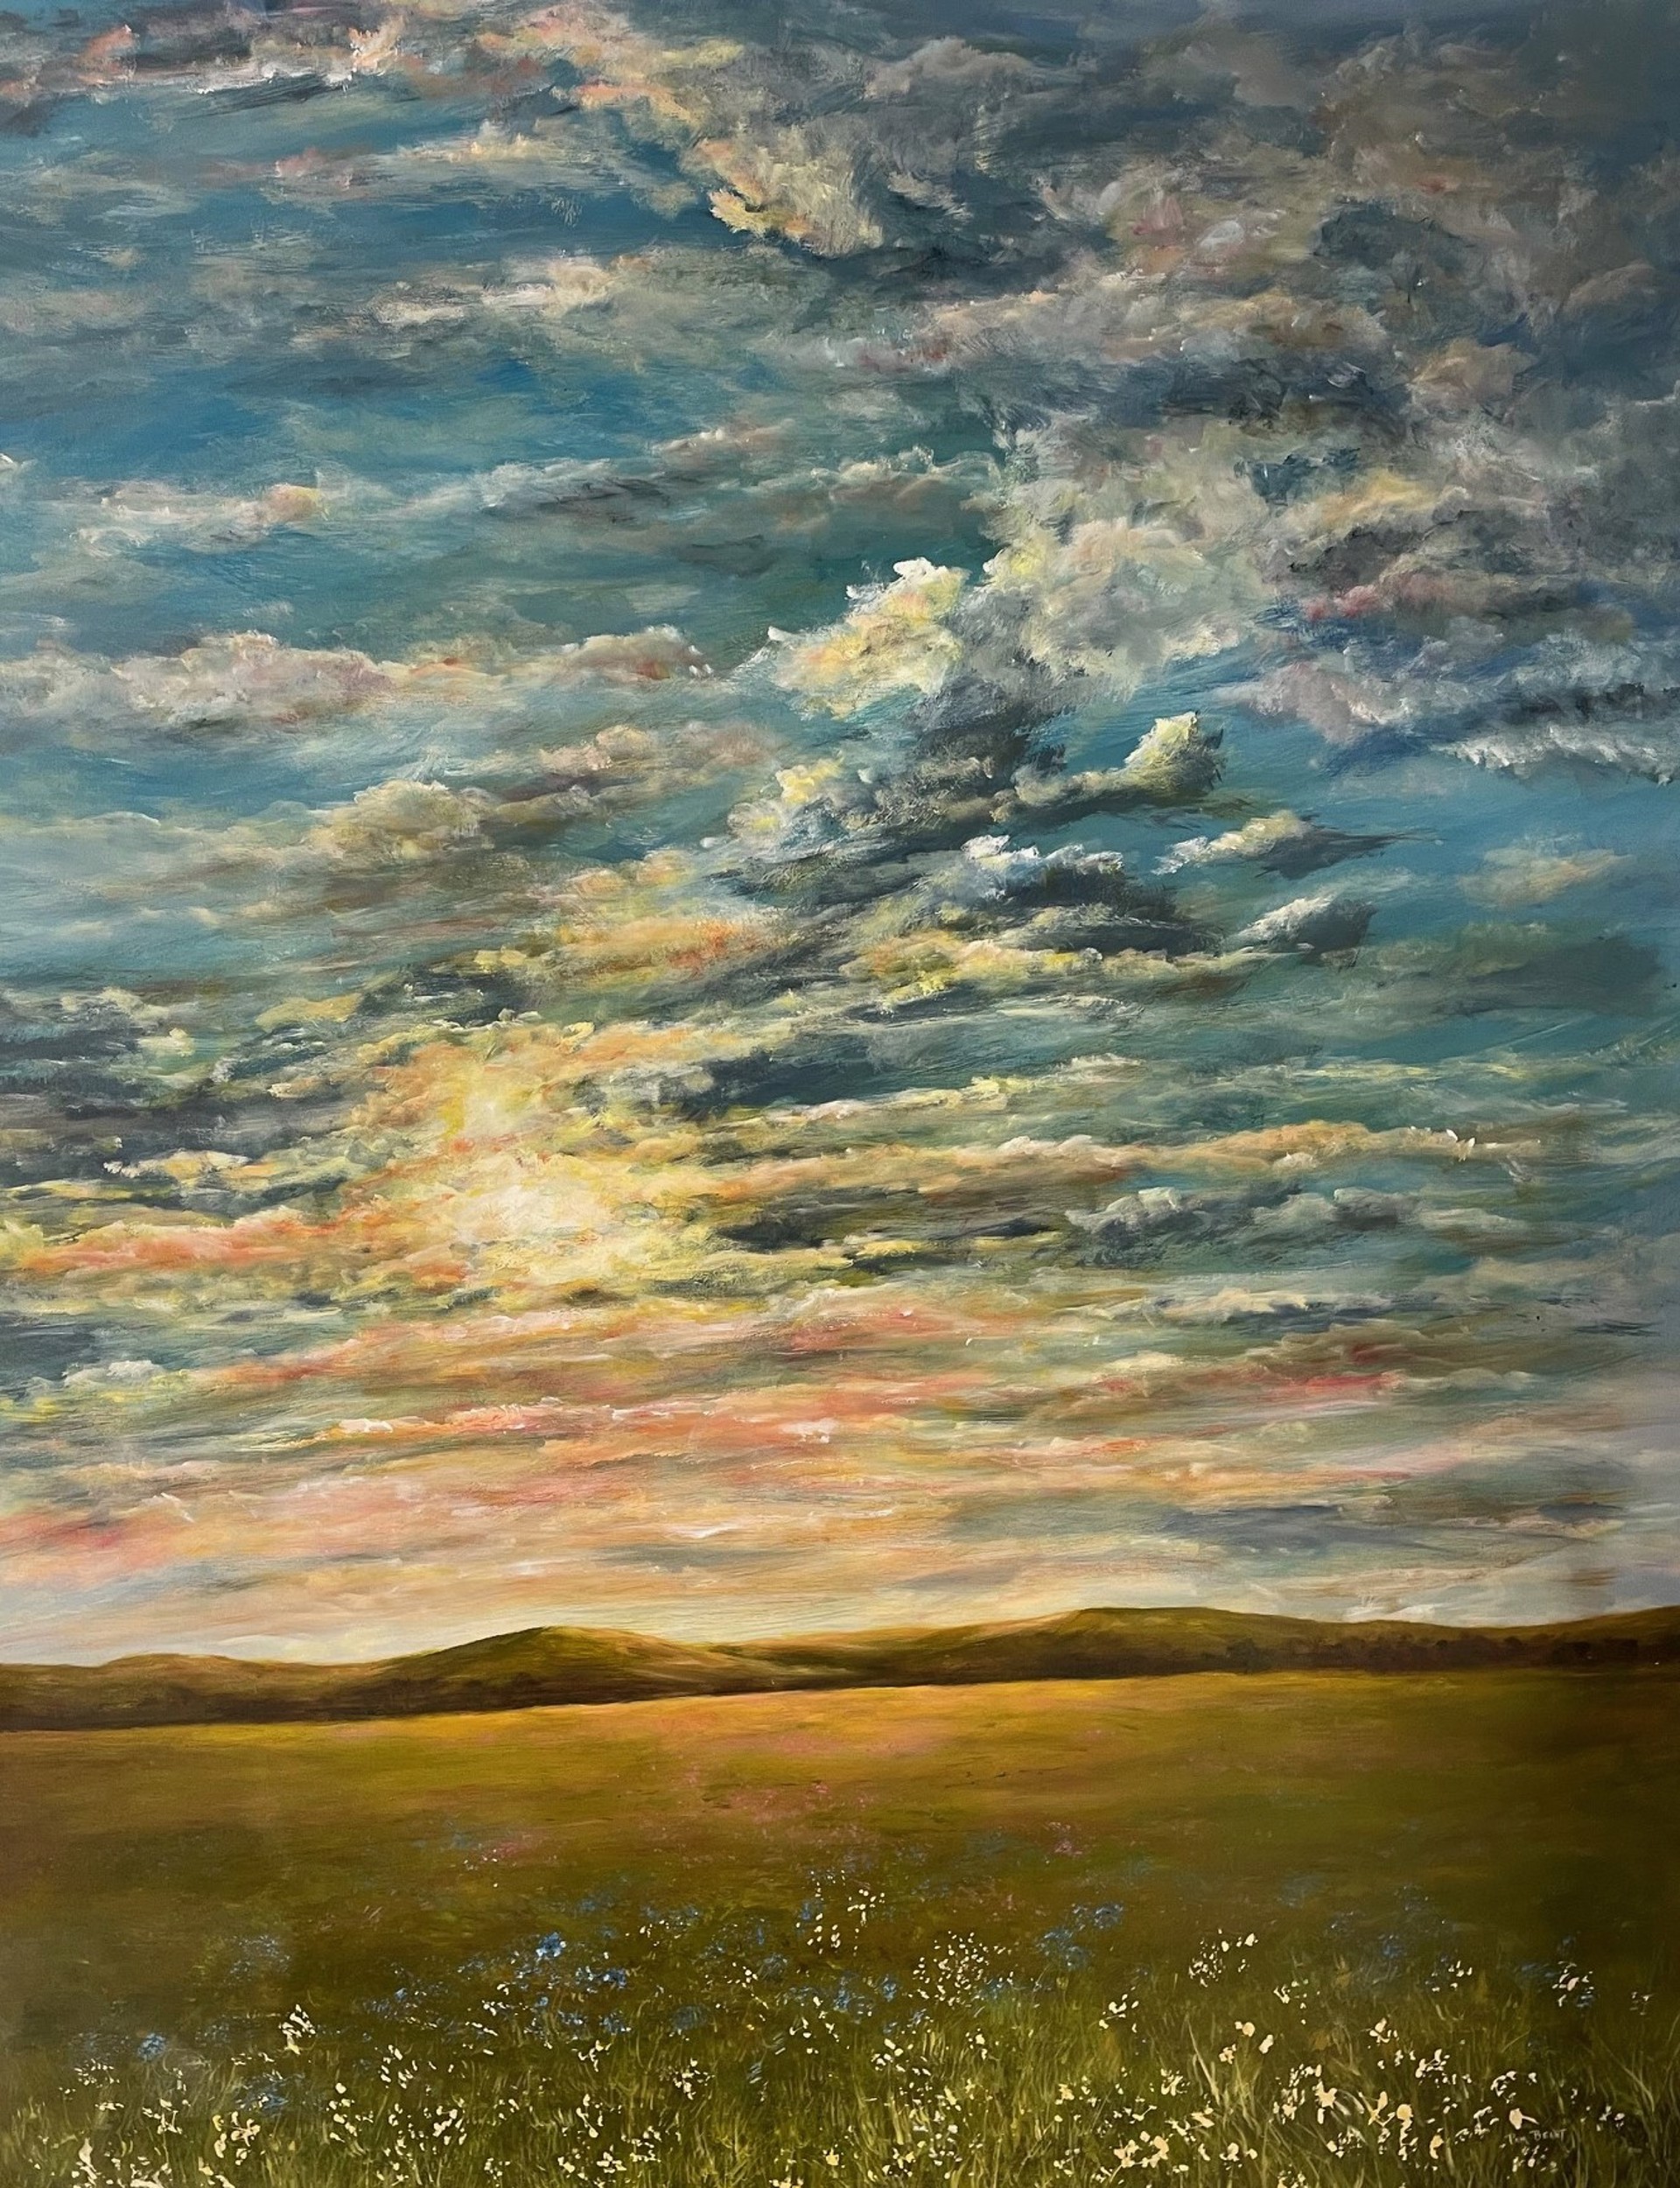 Sunset Over the Prairie by Pam Brant